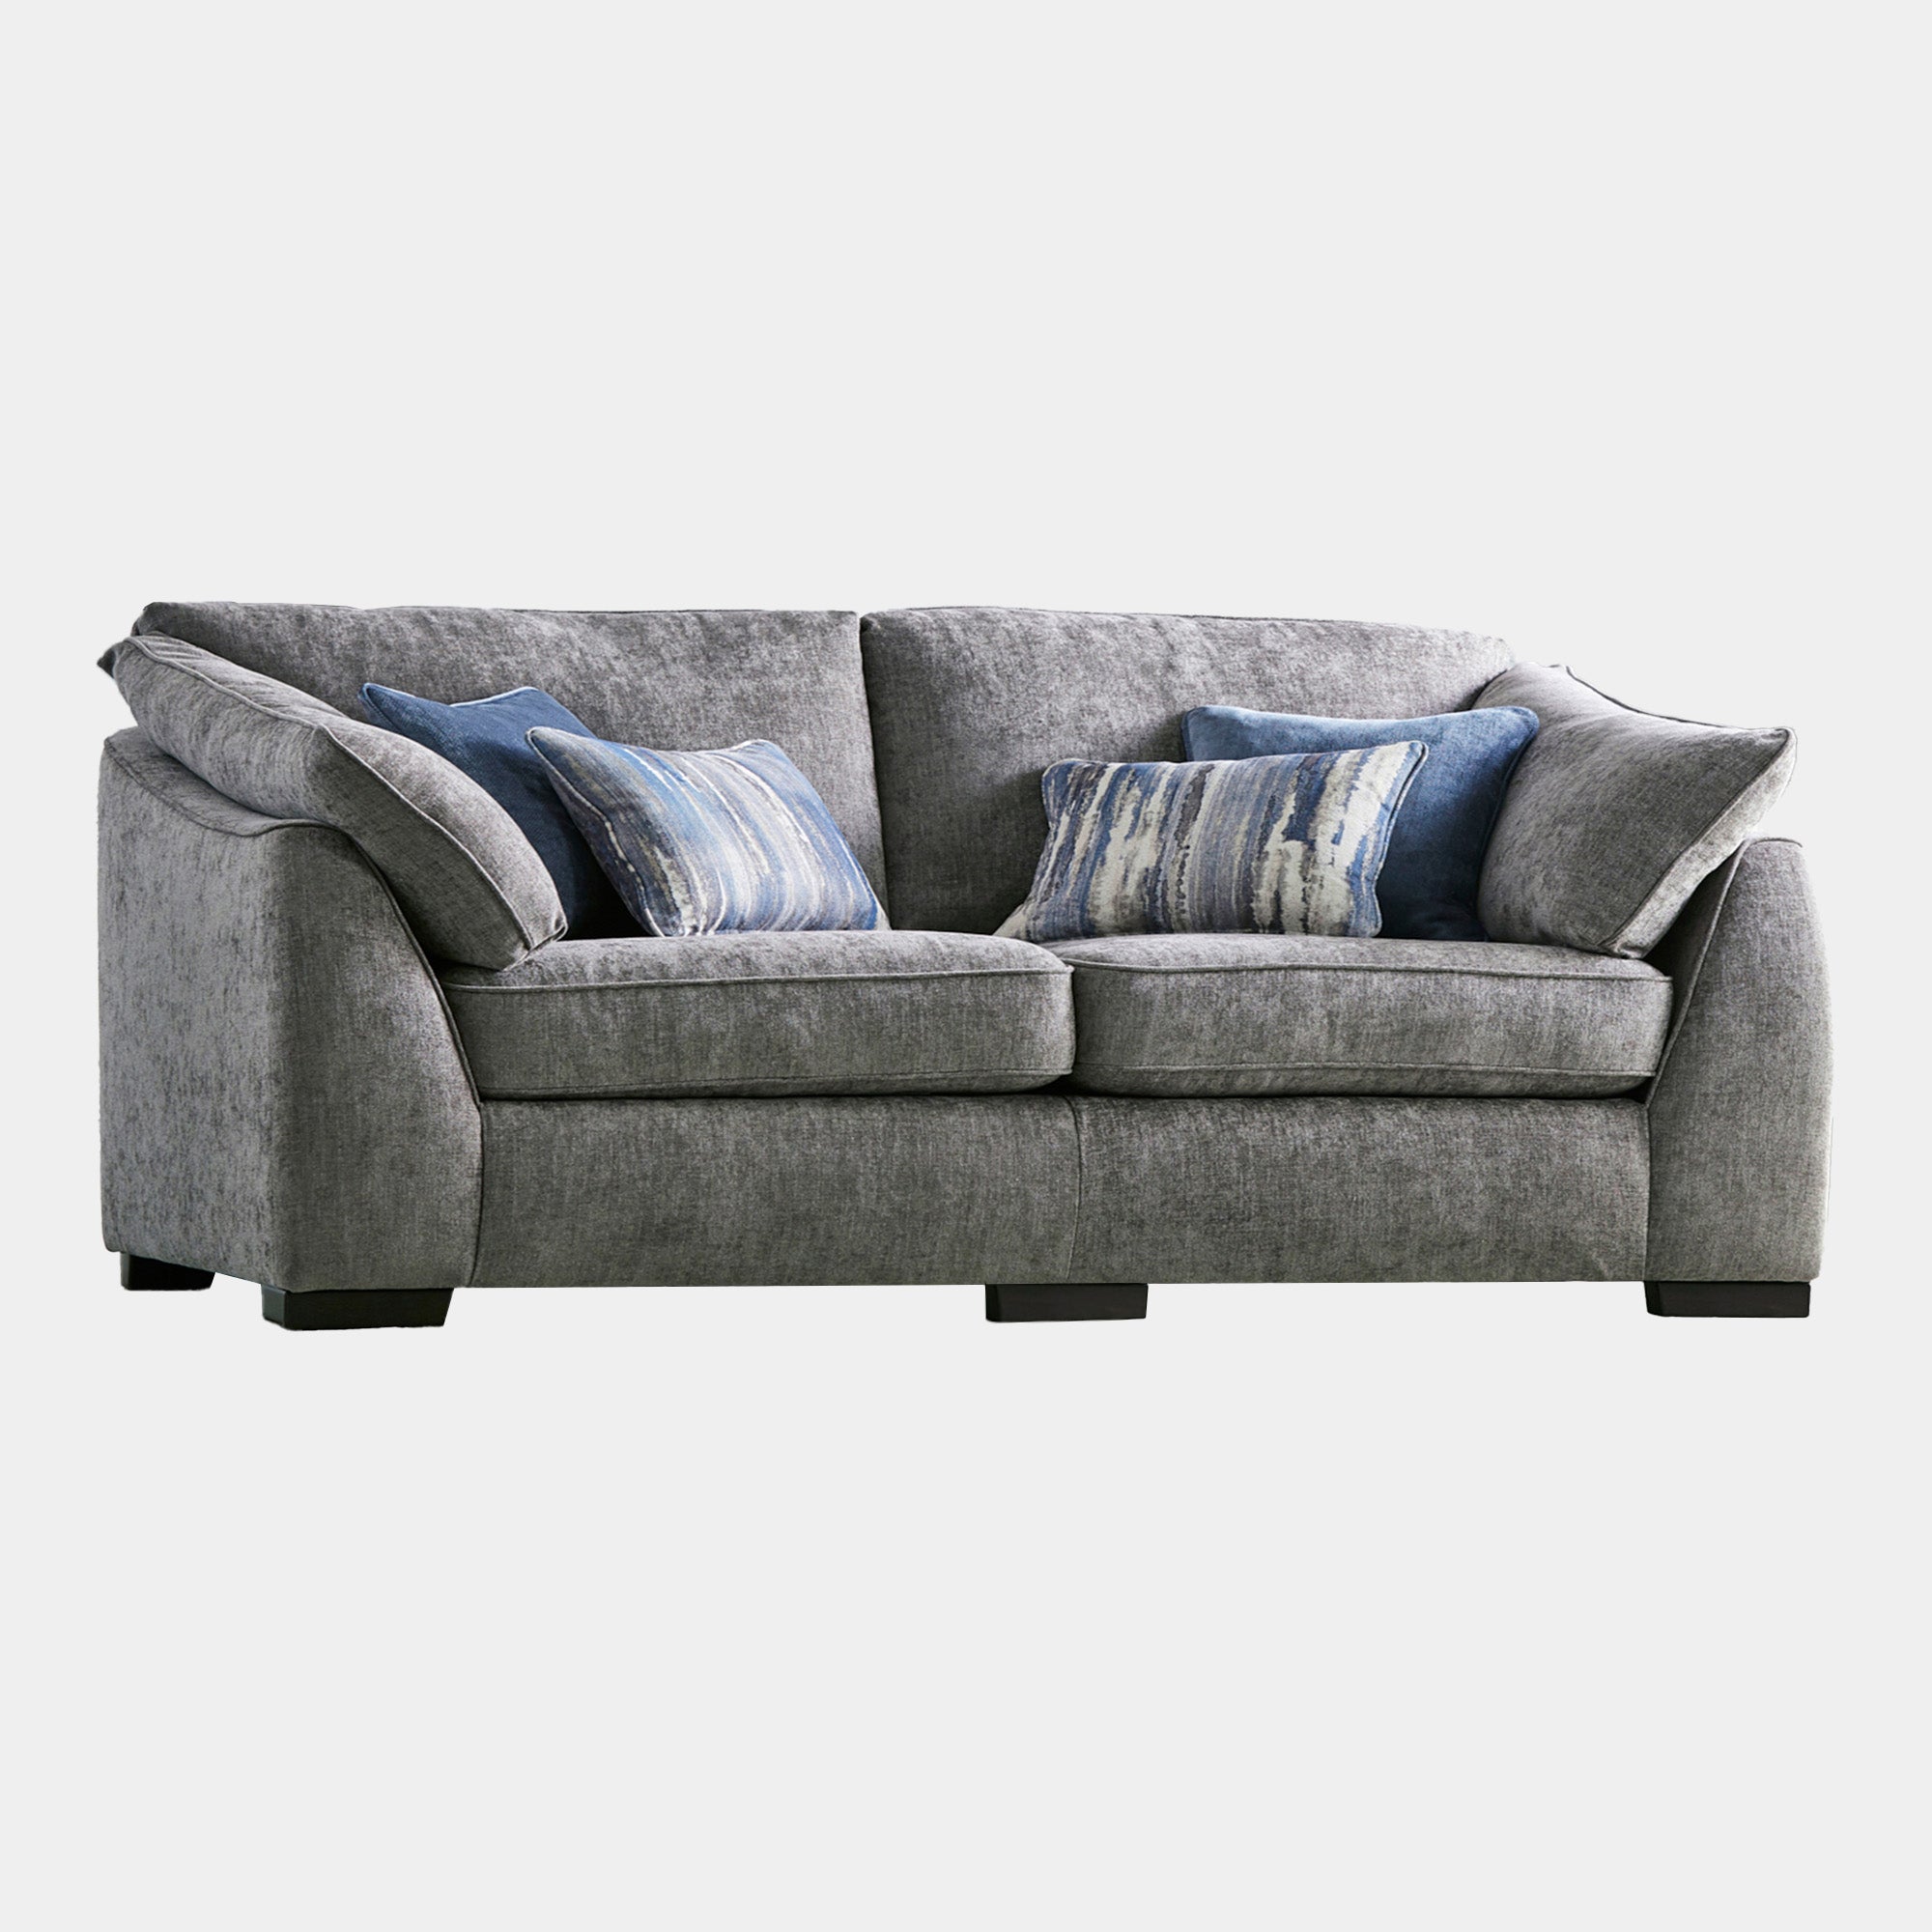 4 Seat Sofa In Fabric Dolce